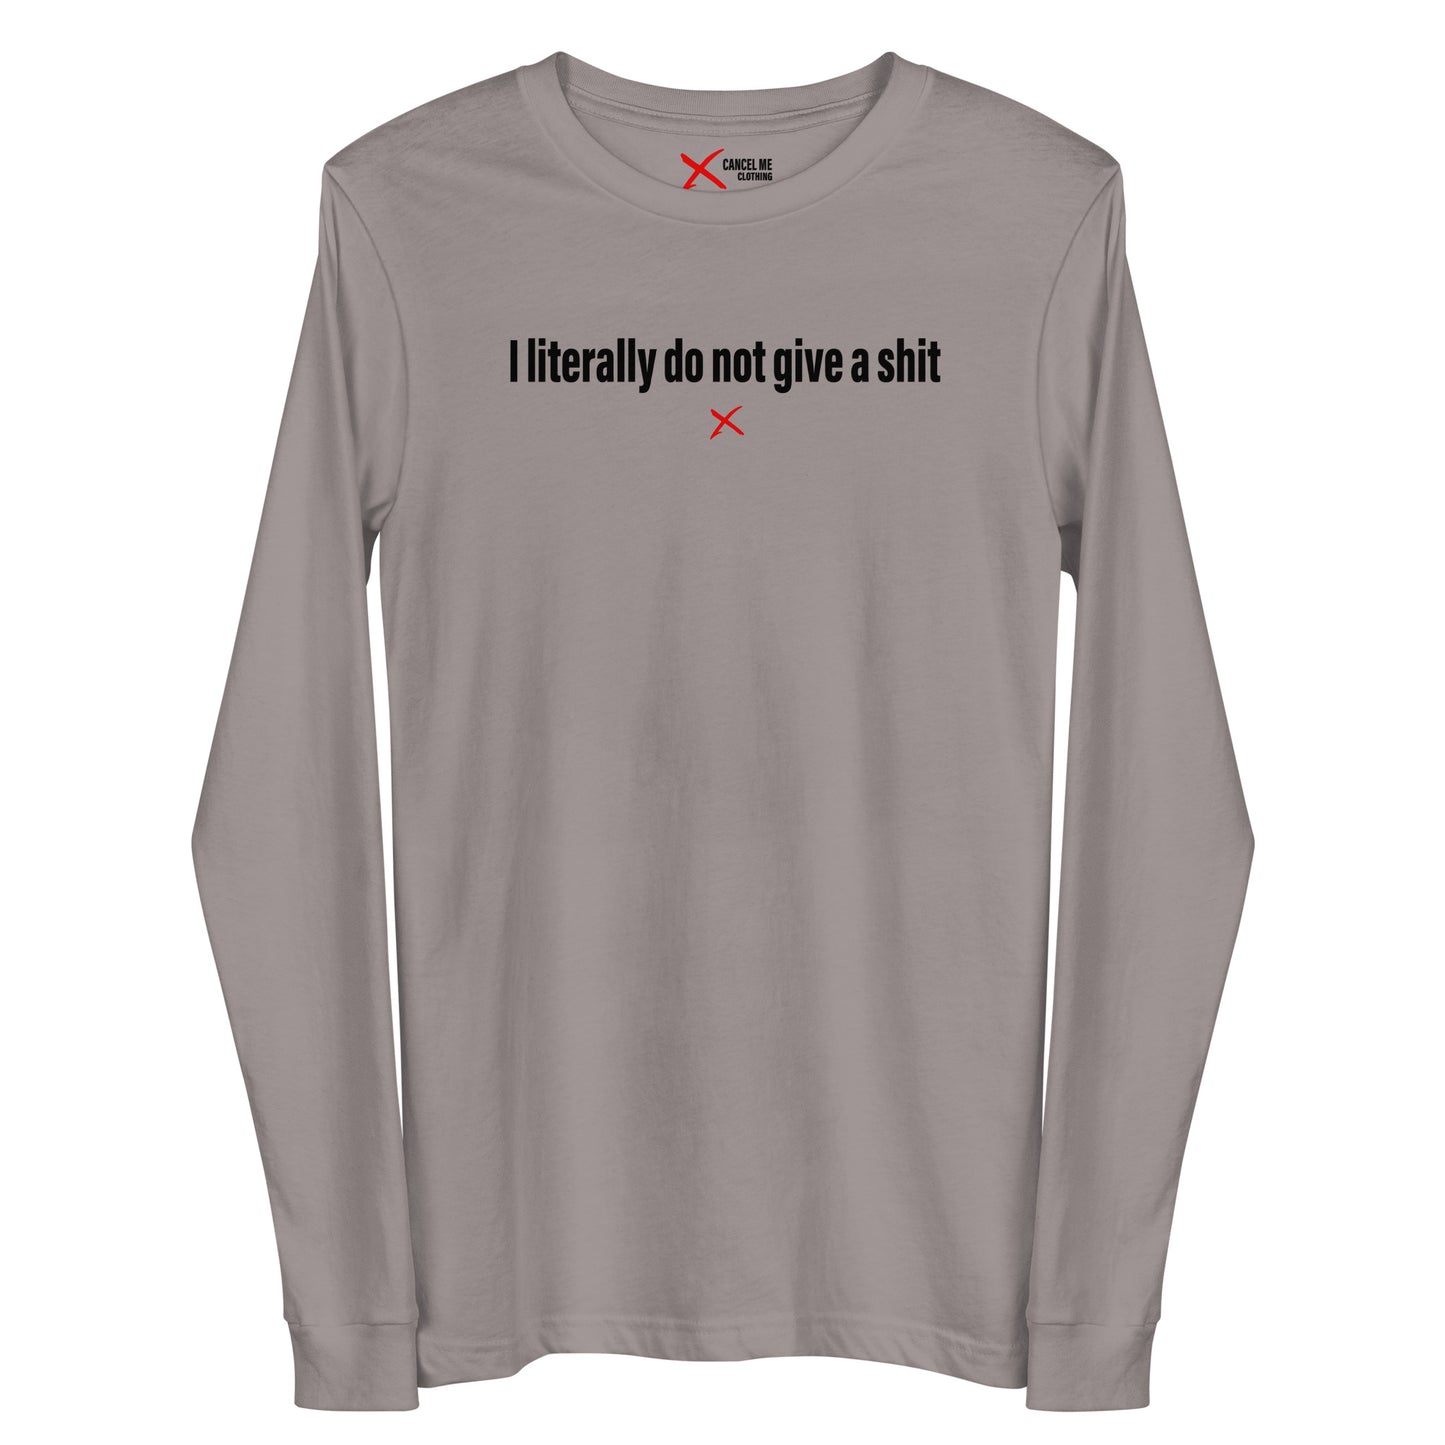 I literally do not give a shit - Longsleeve